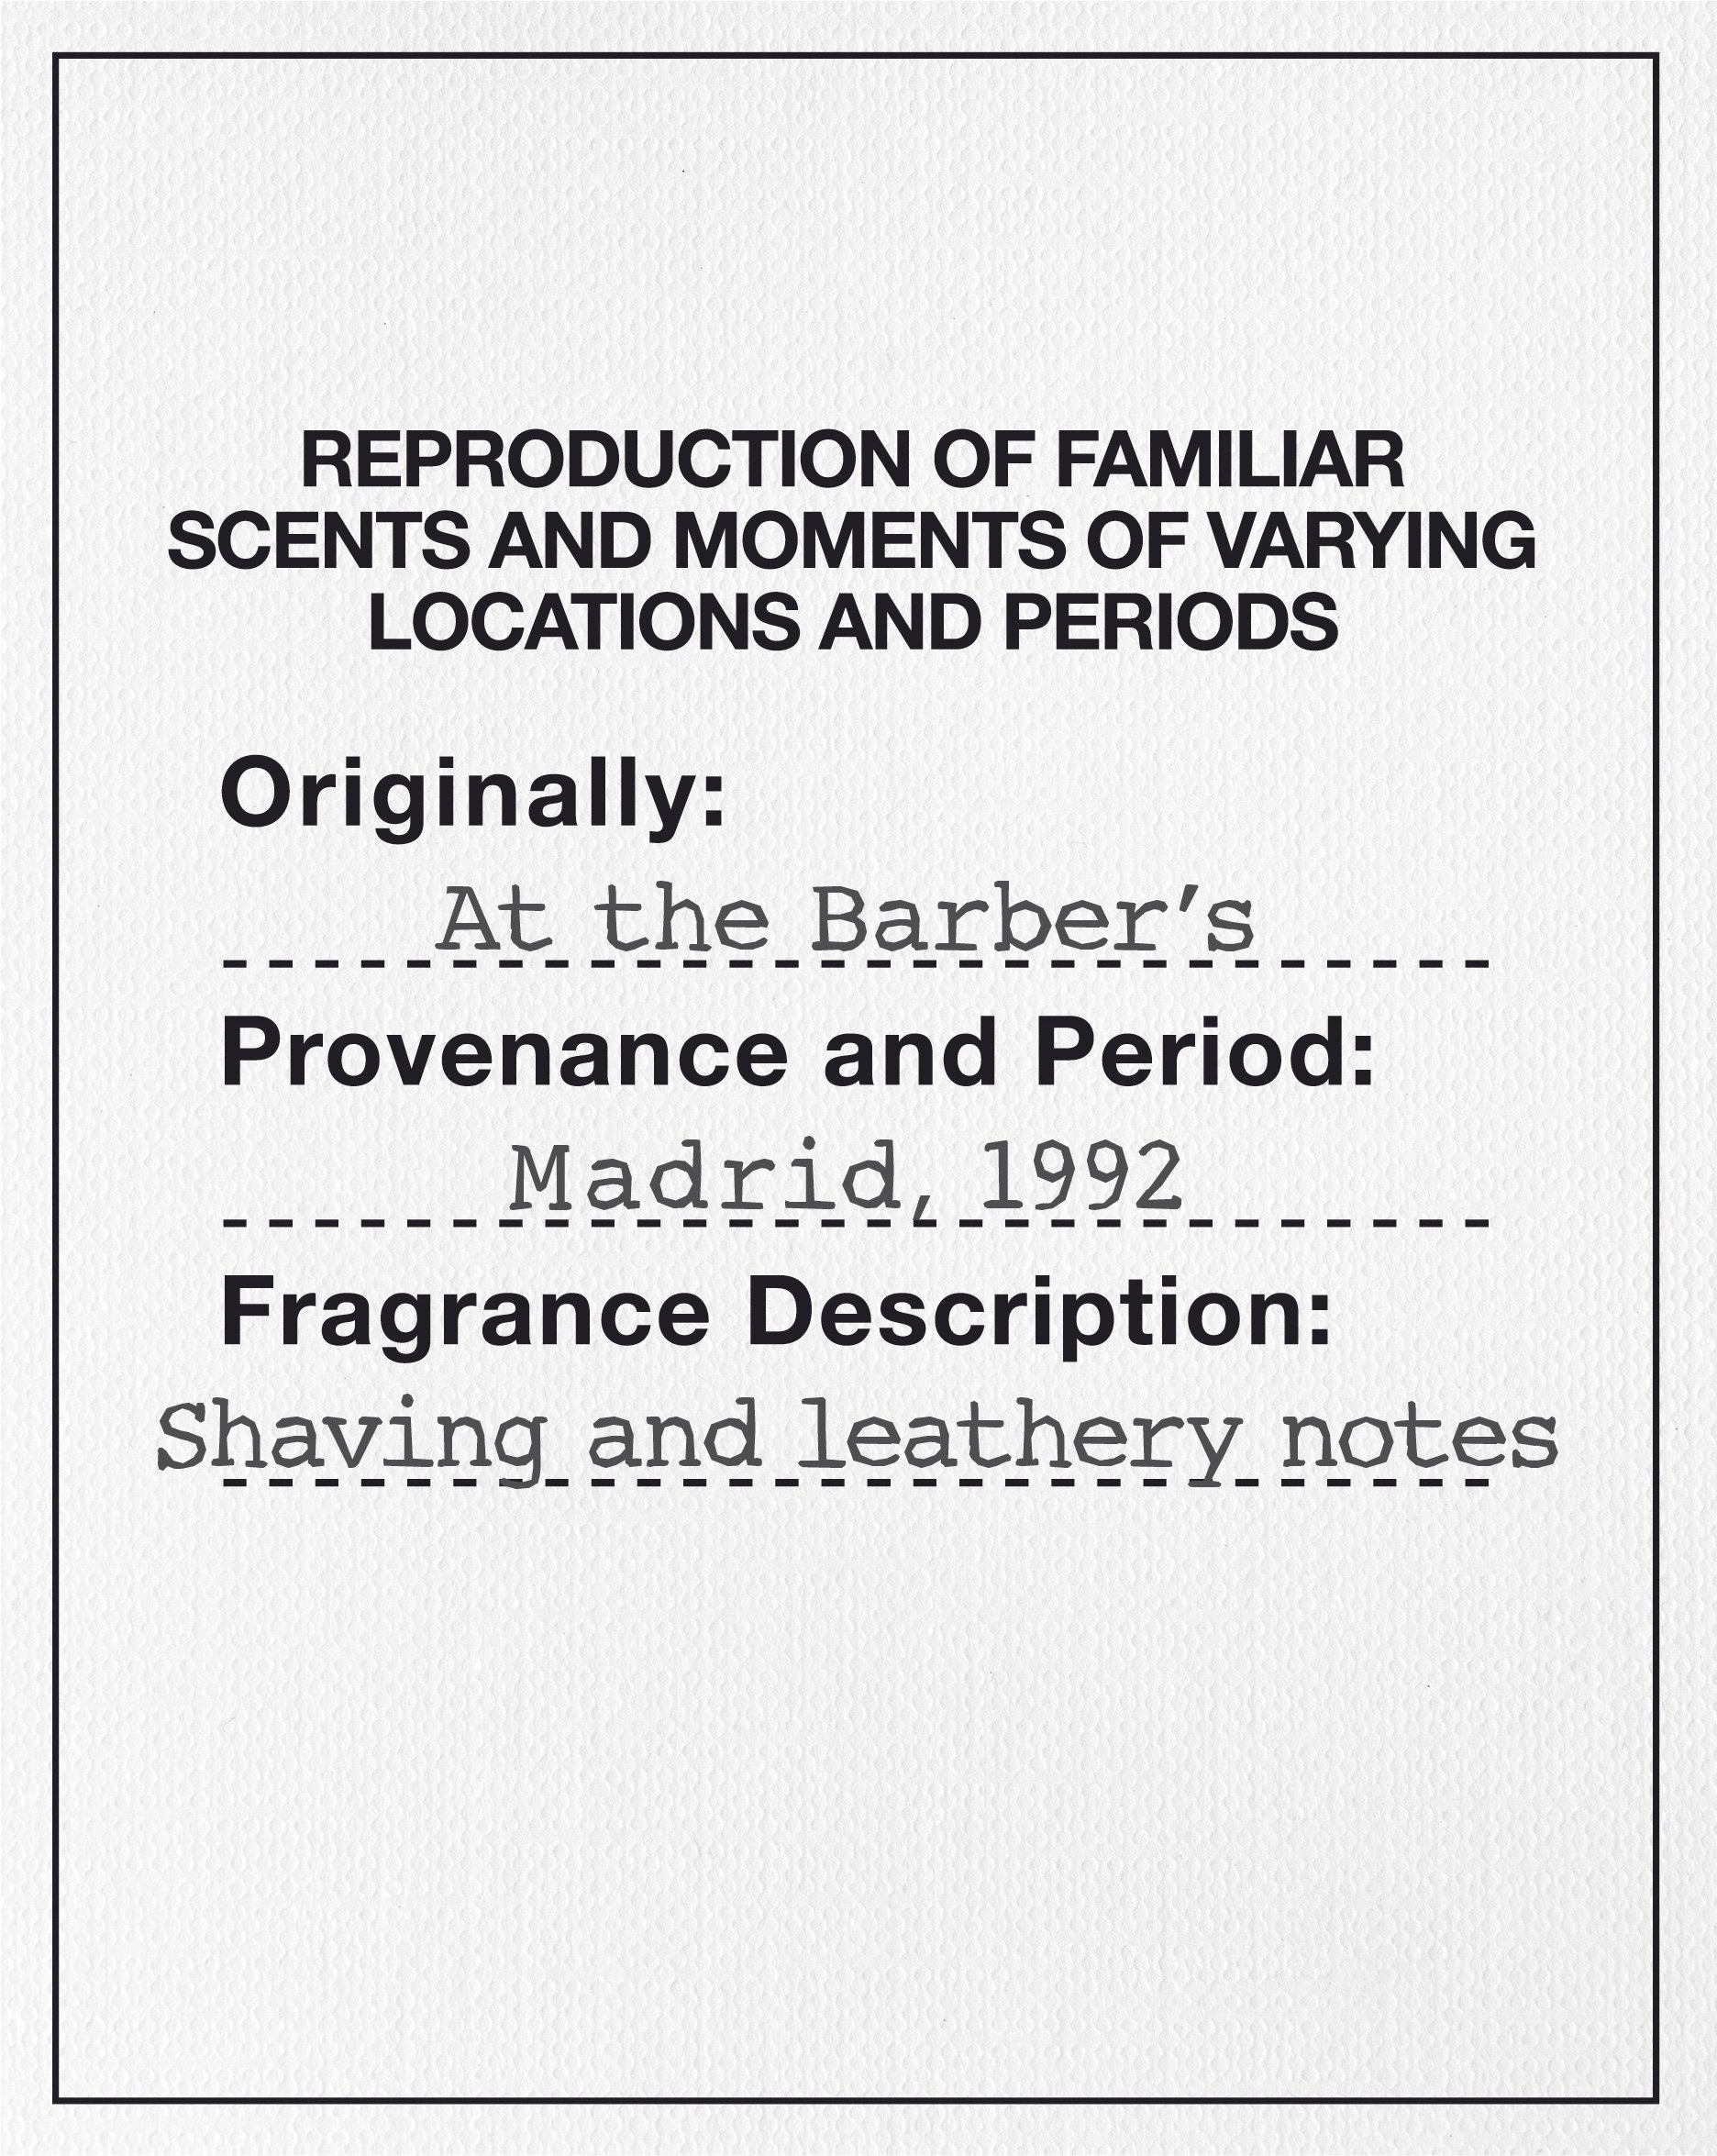  REPRODUCTION OF FAMILIAR SCENTS AND MOMENTS OF VARYING LOCATIONS AND PERIODS ORIGINALLY: AT THE BARBER'S PROVENANCE AND PERIOD: 